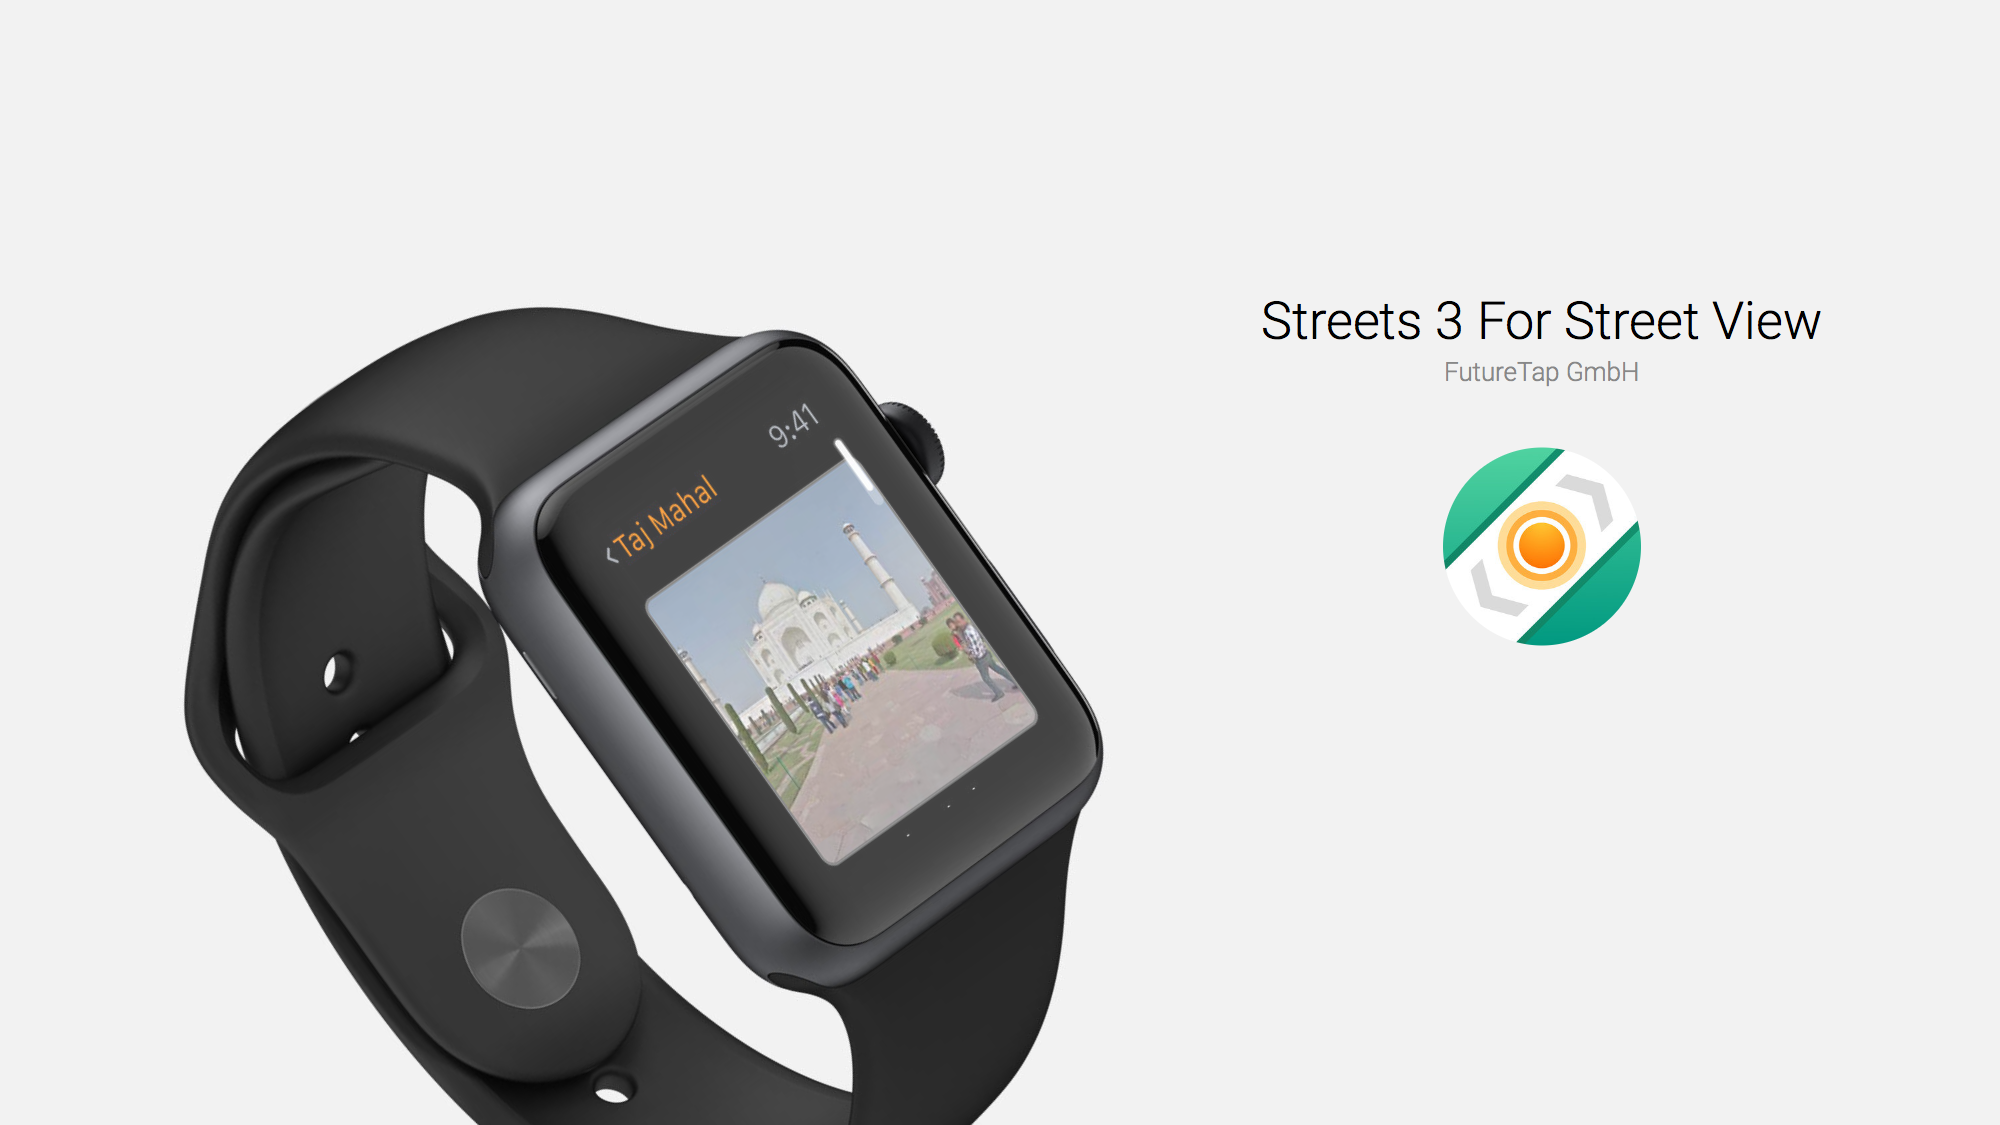 Streets 3 for Street View Offers Panoramic Street Views and More